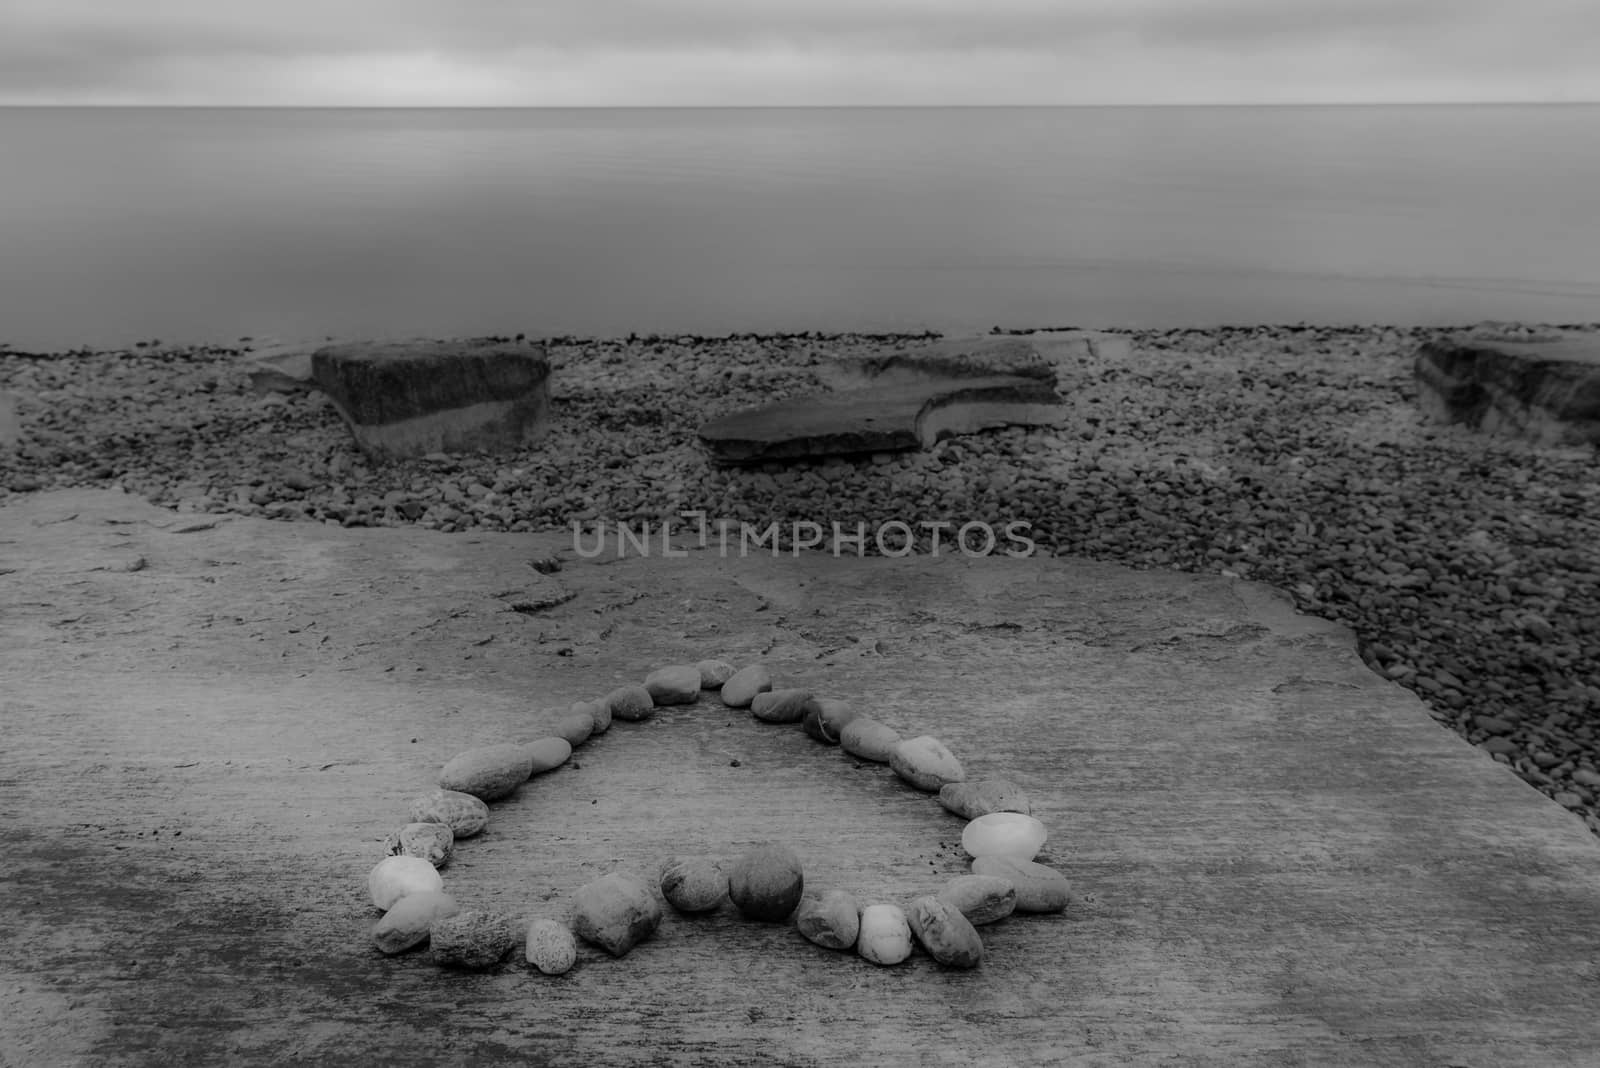 Dreamy image in monochrome settings with a heart shape made from stones, on the shore of the lake Bodensee, city FriedrichsHafen, Germany